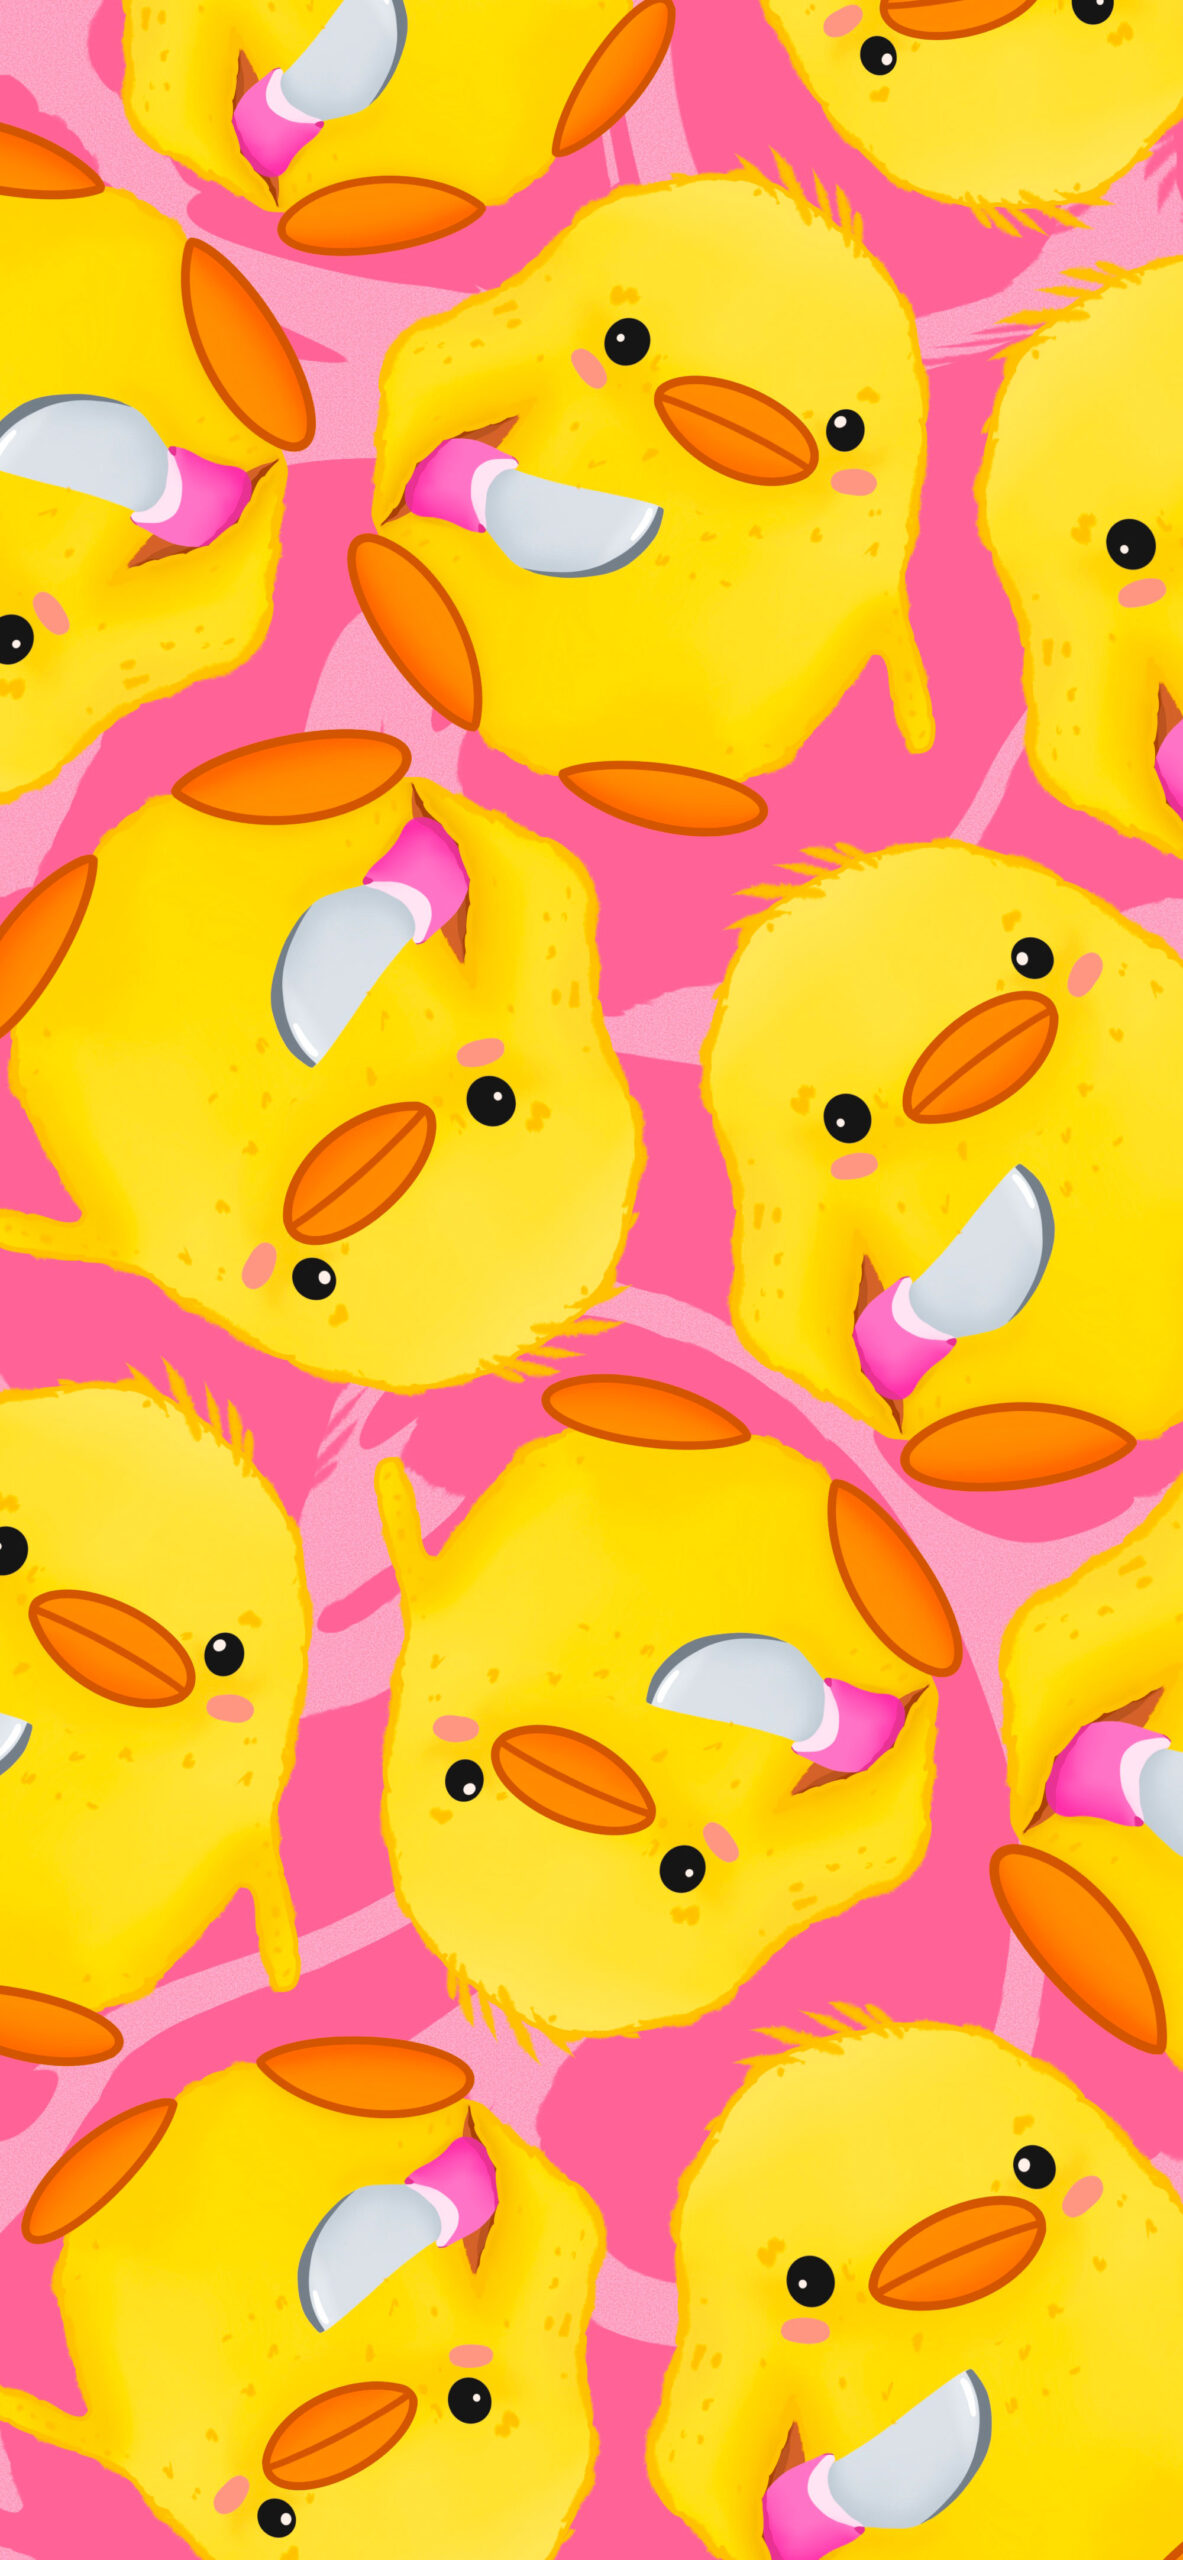 Duck with Knife Meme Wallpaper for Phone - Pink Wallpaper with Memes